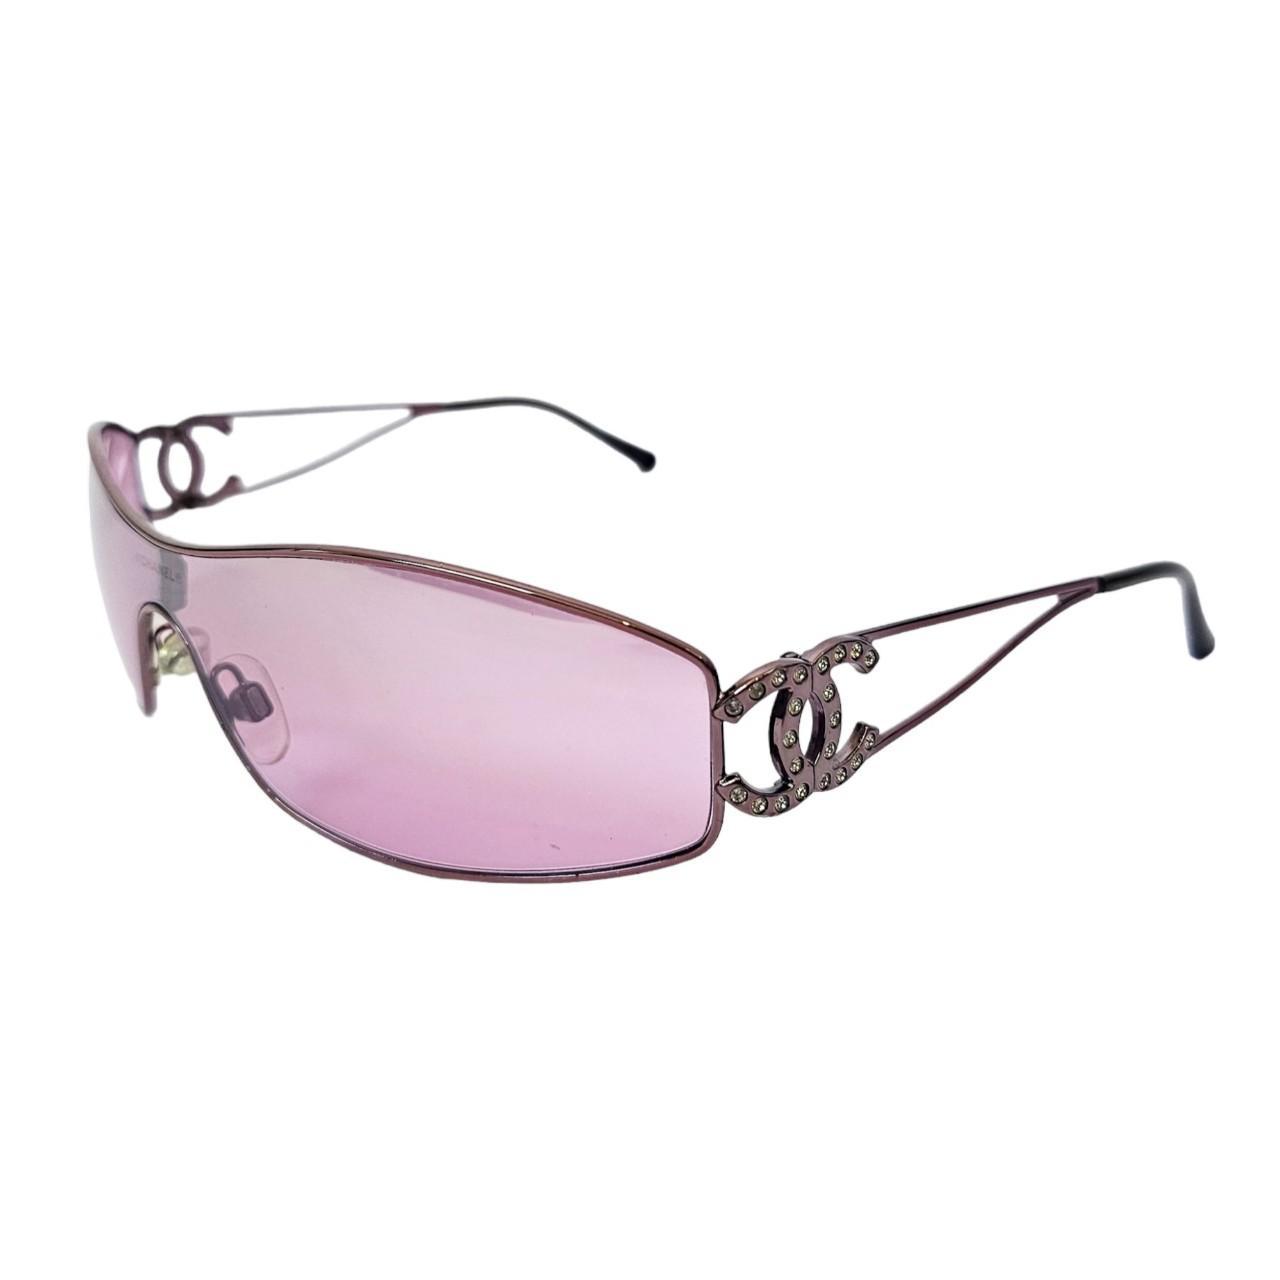 CHANEL Rimless Square Sunglasses Silver Pink Gradient Camellia Flower 4085  Auth